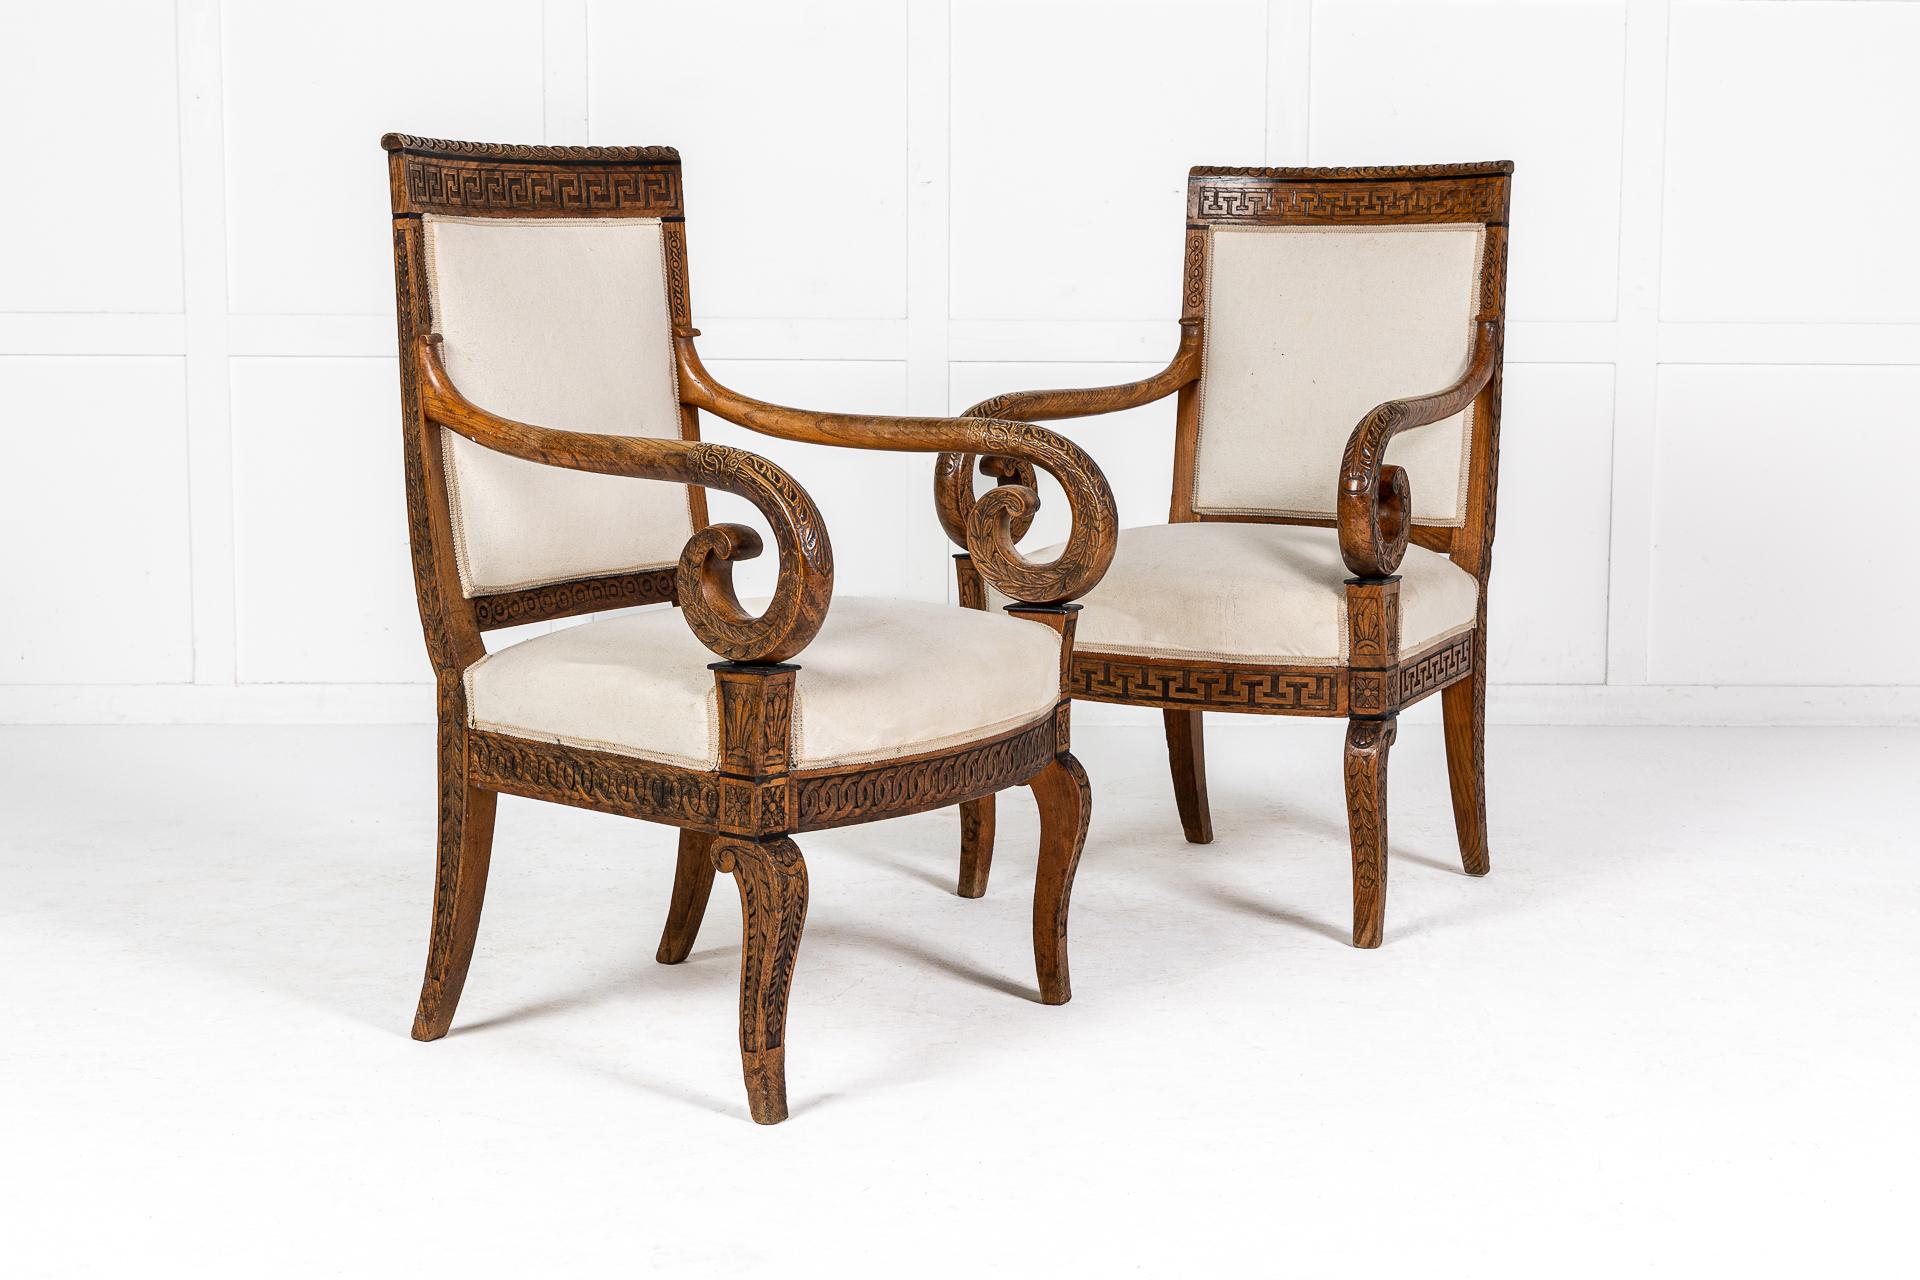 An exceptional, rare pair of 19th Century French, beautifully and profusely carved wood chairs, matched with similar decorative and intricate detail. The top rails having the same geometric design with ebony detail that repeats under the arms and